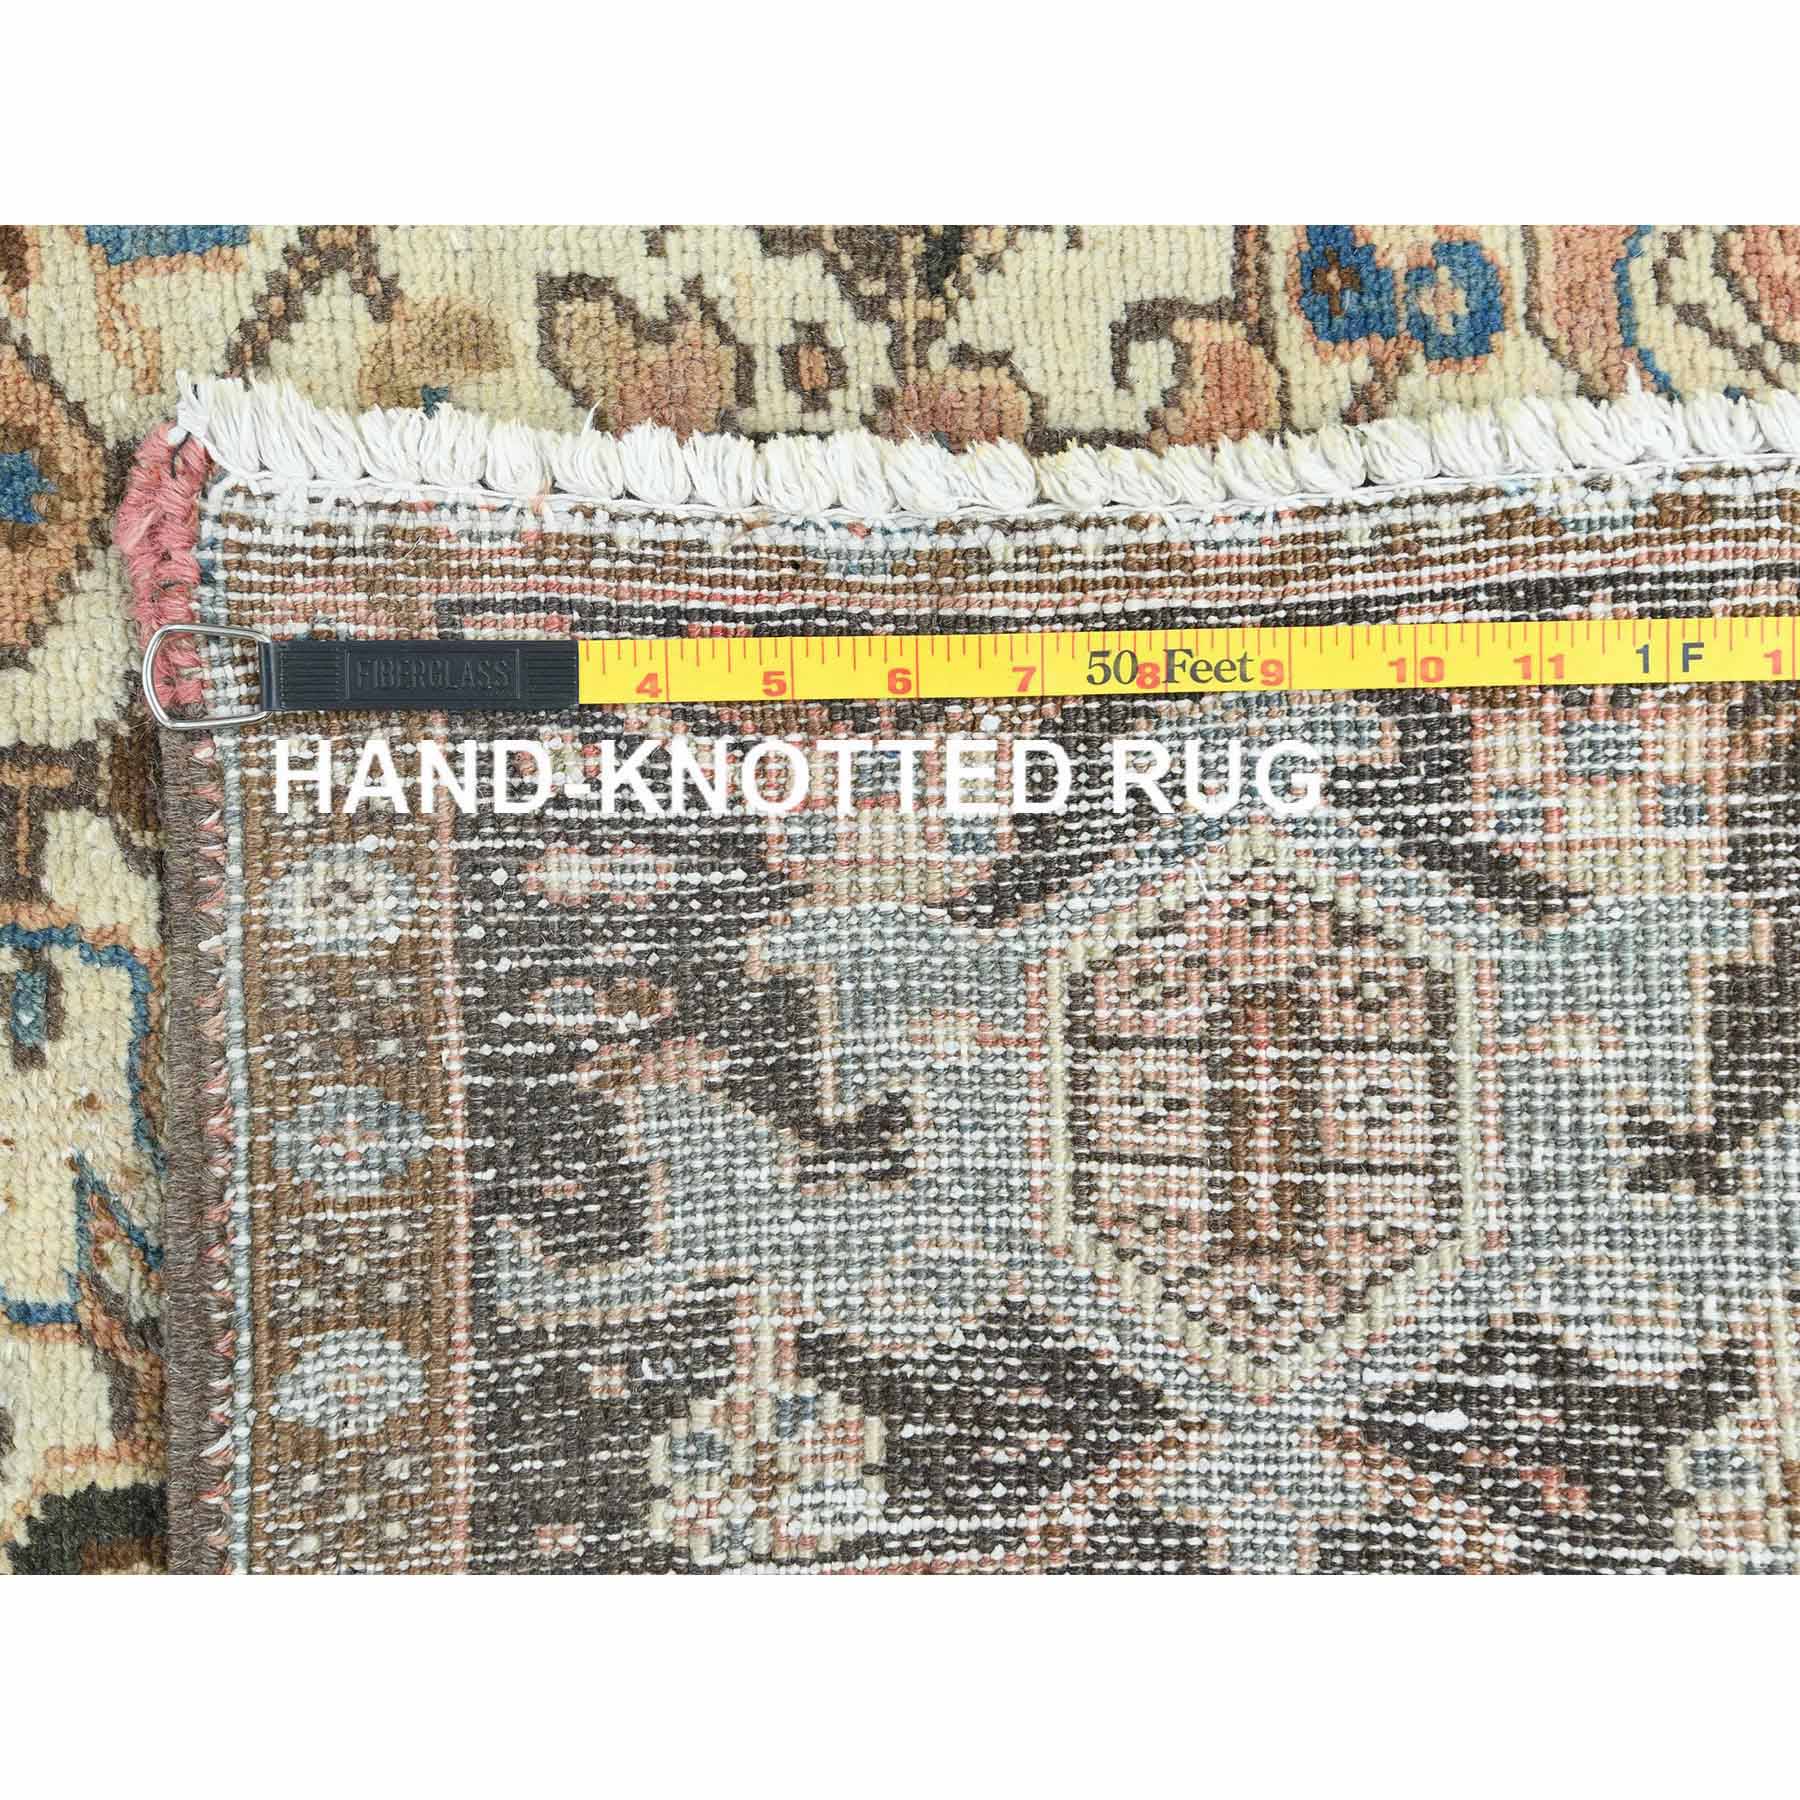 Overdyed-Vintage-Hand-Knotted-Rug-410360